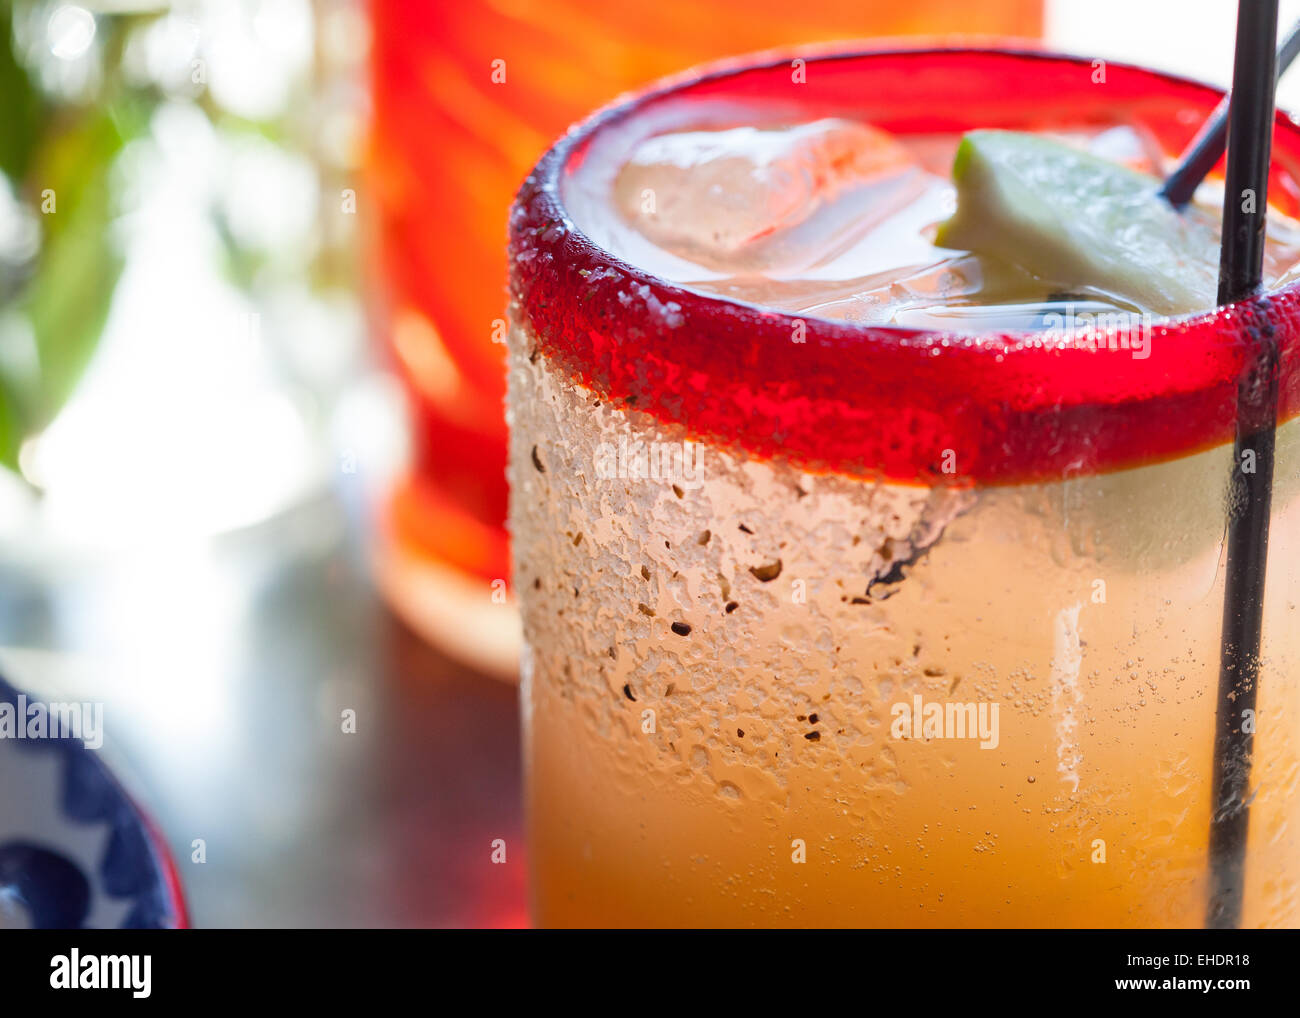 Margarita with salt and pepper on rim Stock Photo